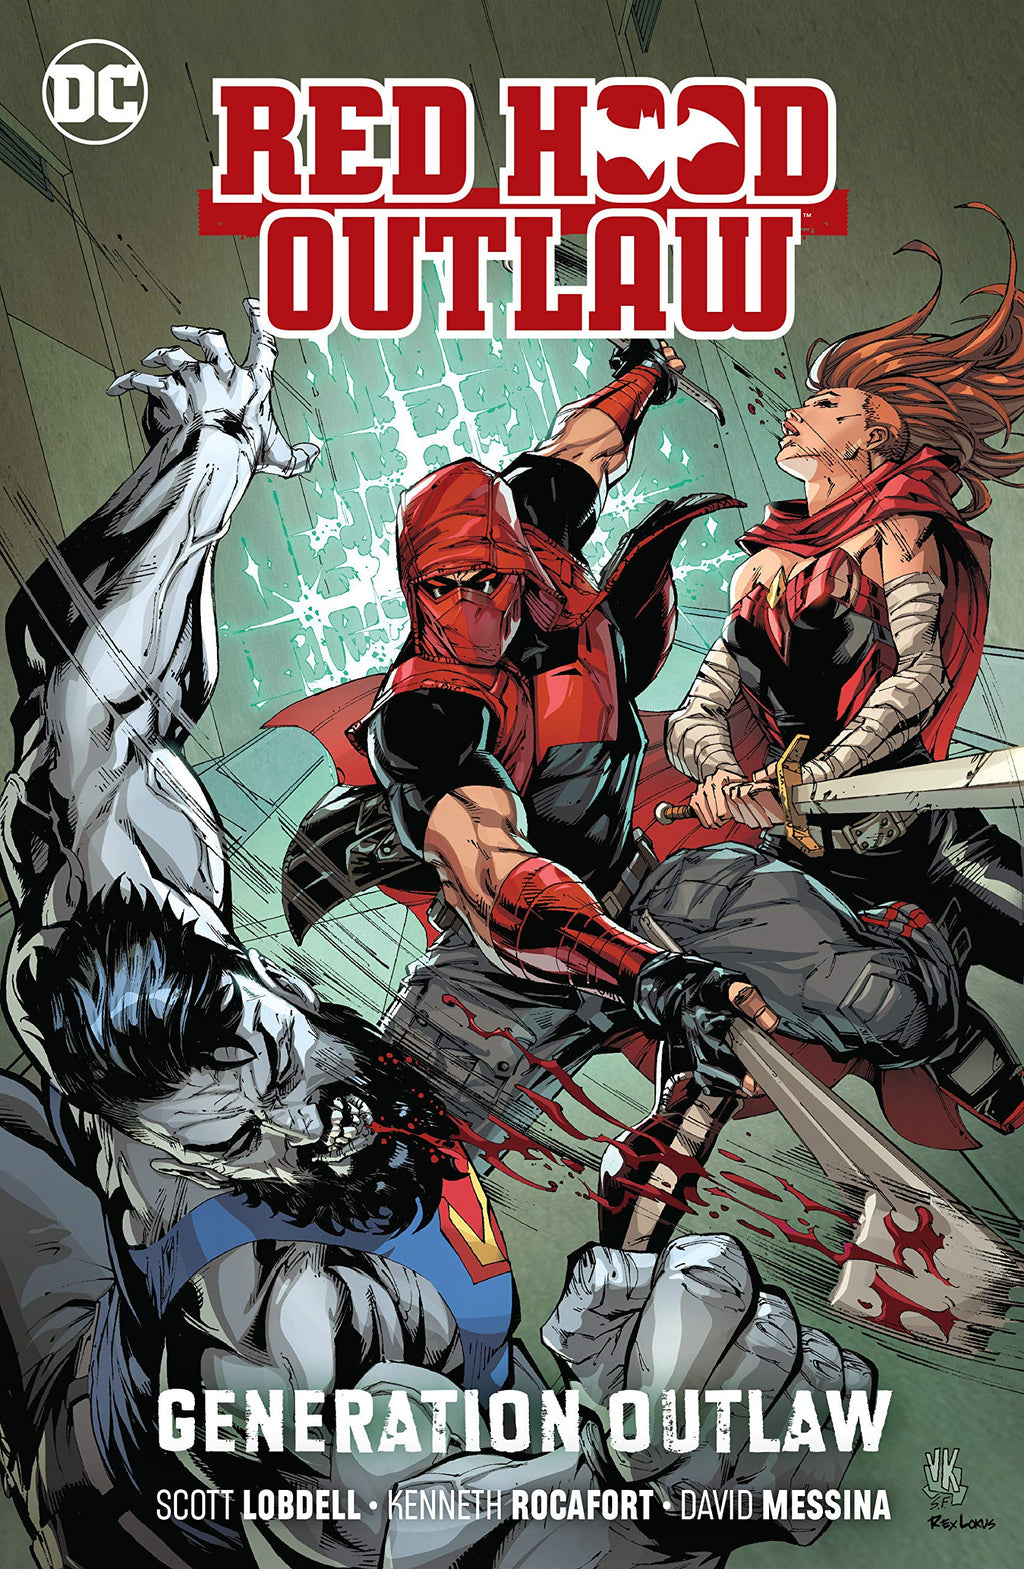 Red Hood : Outlaw Volume 3 Generation Outlaw - The Comic Warehouse